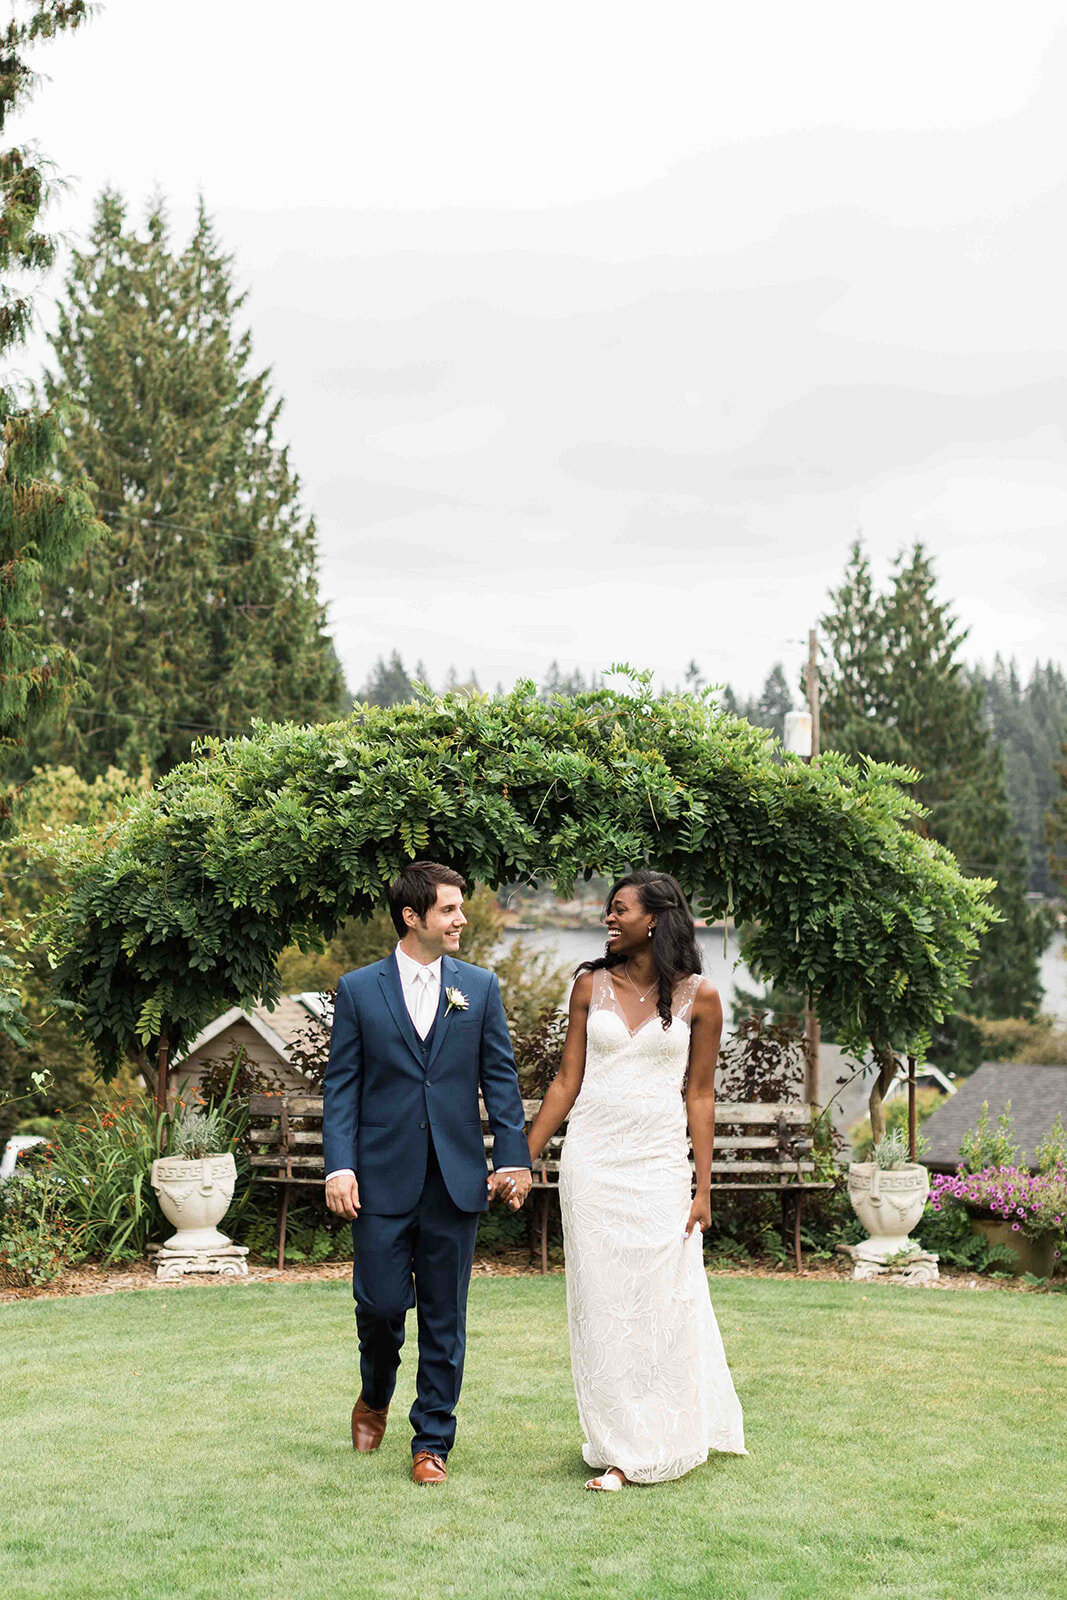 Venue Photos of Green Gates at Flowing Lake by Joanna Monger Photography Snohomish Photographers